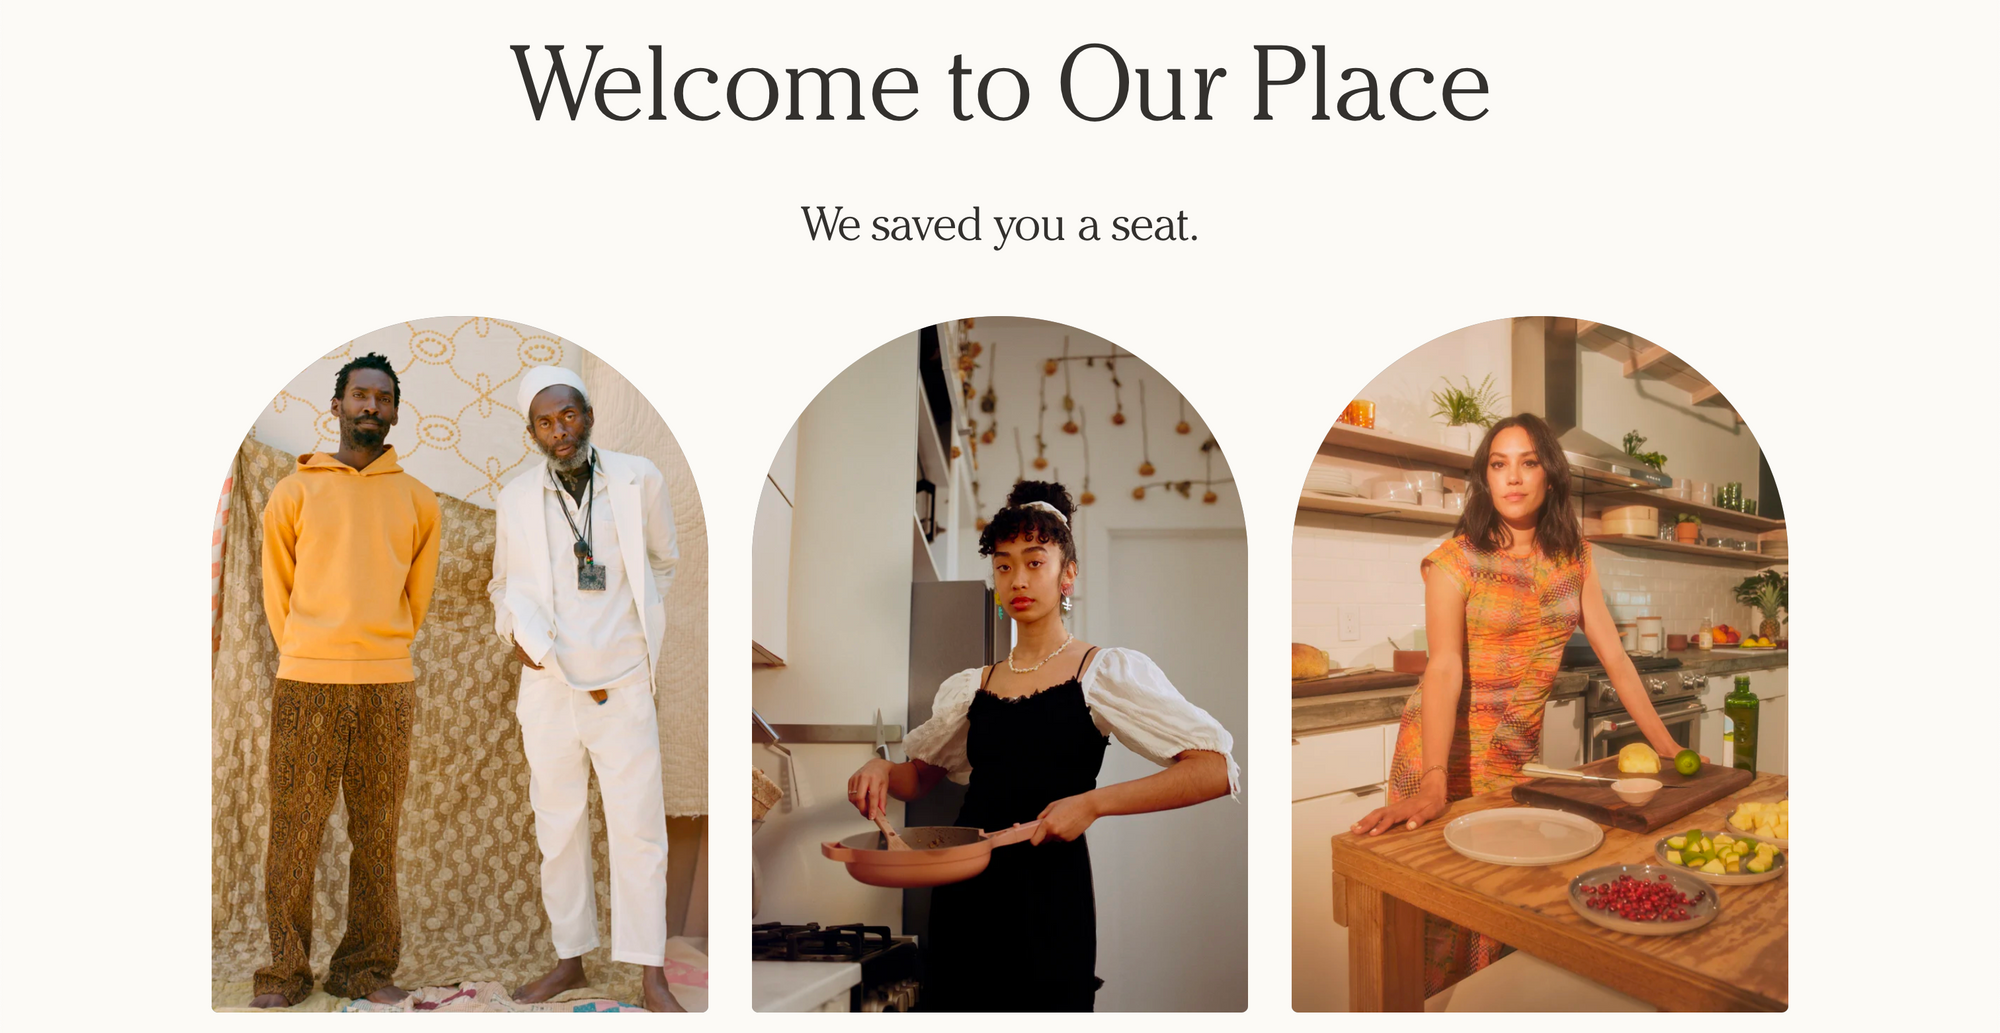 A screenshot of the Our Place website that says, “Welcome to Our Place. We saved you a seat” and shows three photos of people at home from different parts of the world.